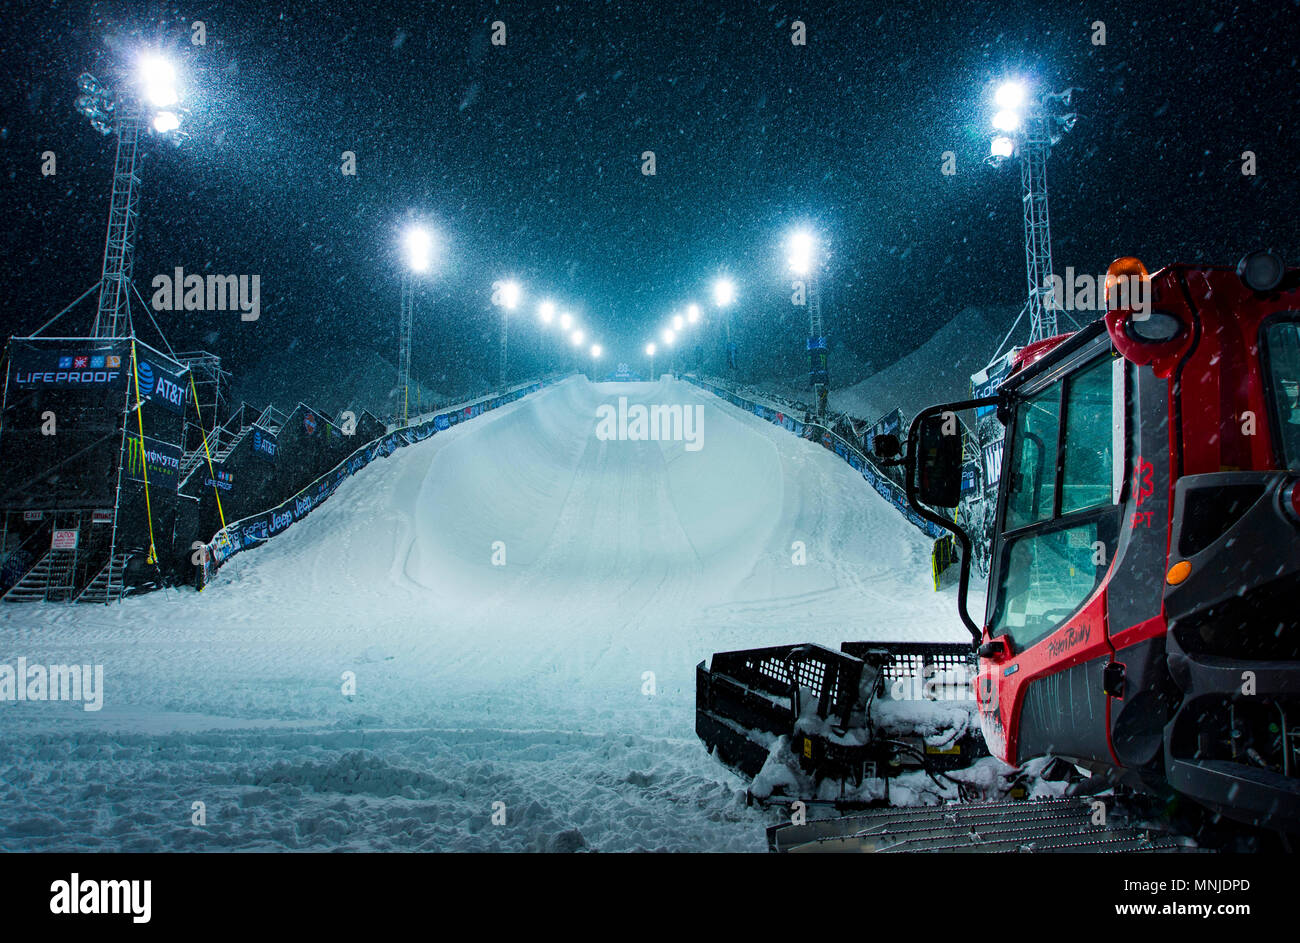 A snowcat parked at the bottom of the X-games half pipe in Aspen, Colorado Stock Photo